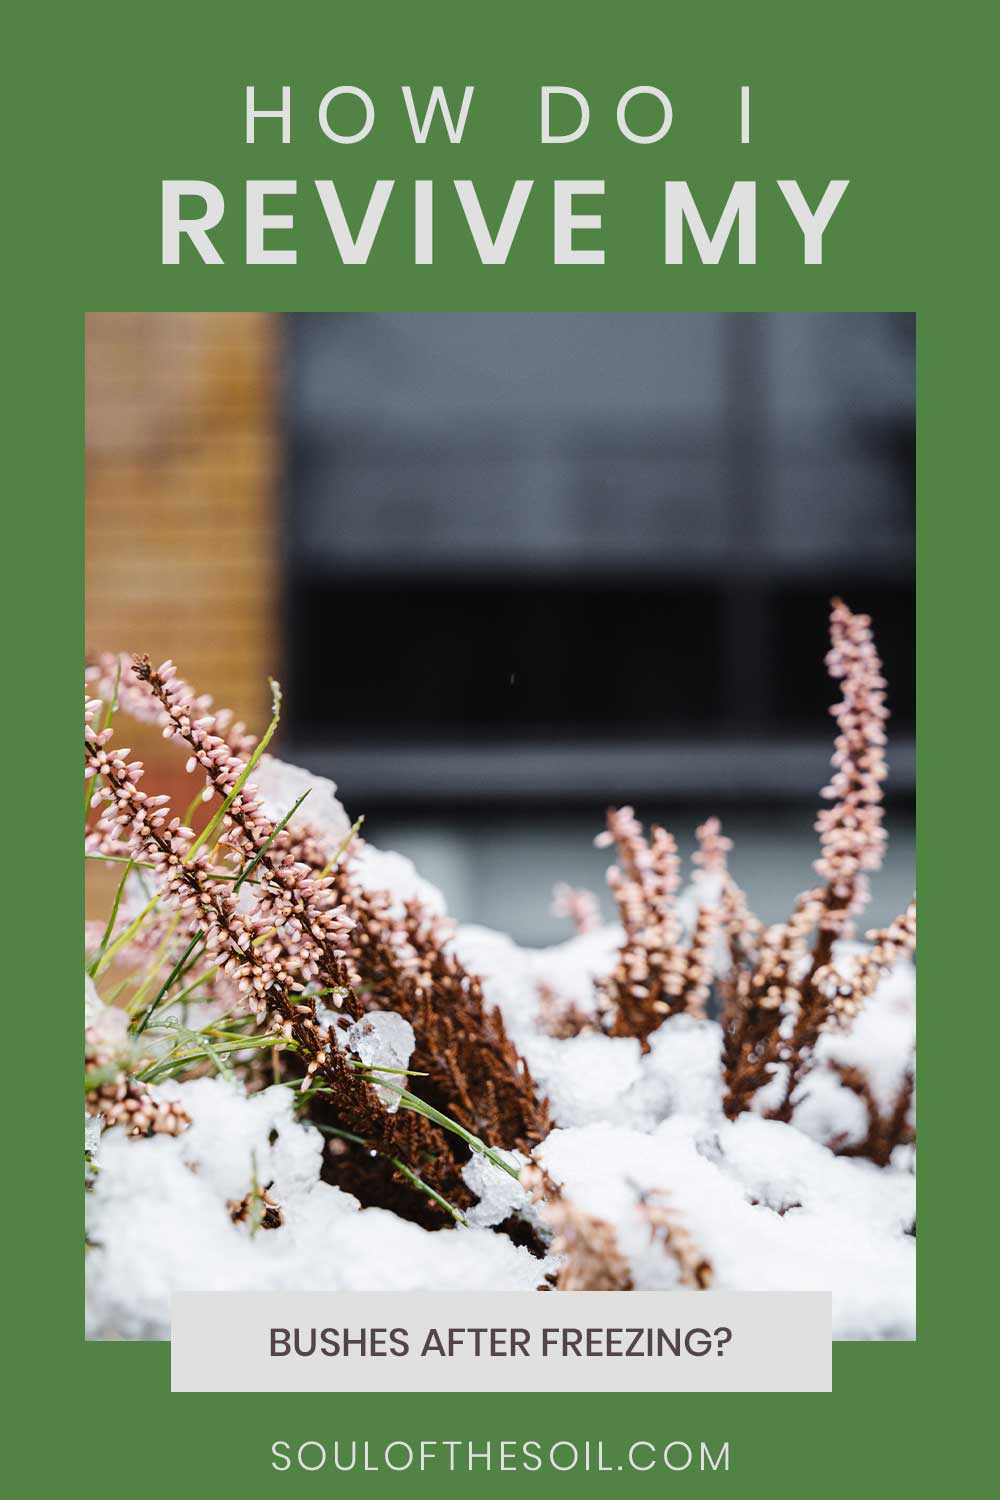 Plants covered in snow - How to Revive Bushes After Freezing?